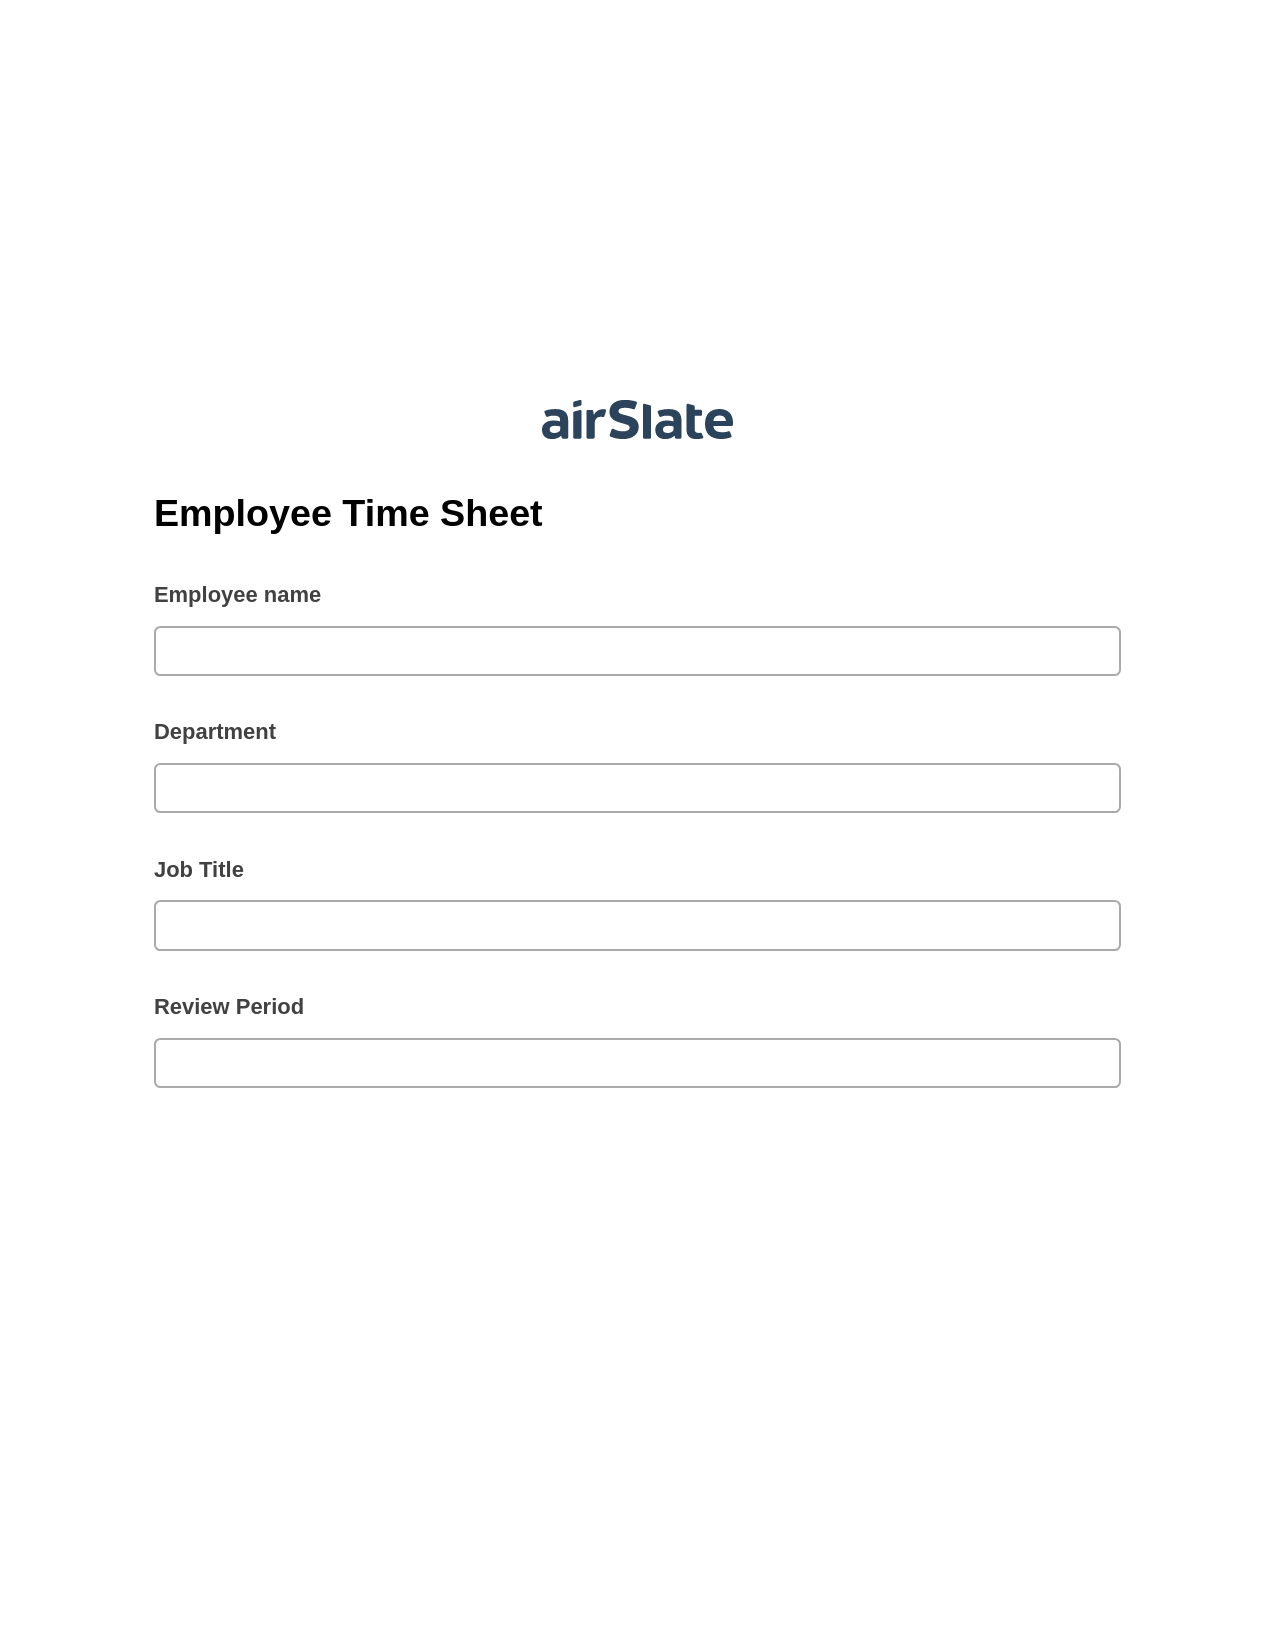 Multirole Employee Time Sheet Pre-fill from another Slate Bot, Create Salesforce Records Bot, Slack Two-Way Binding Bot